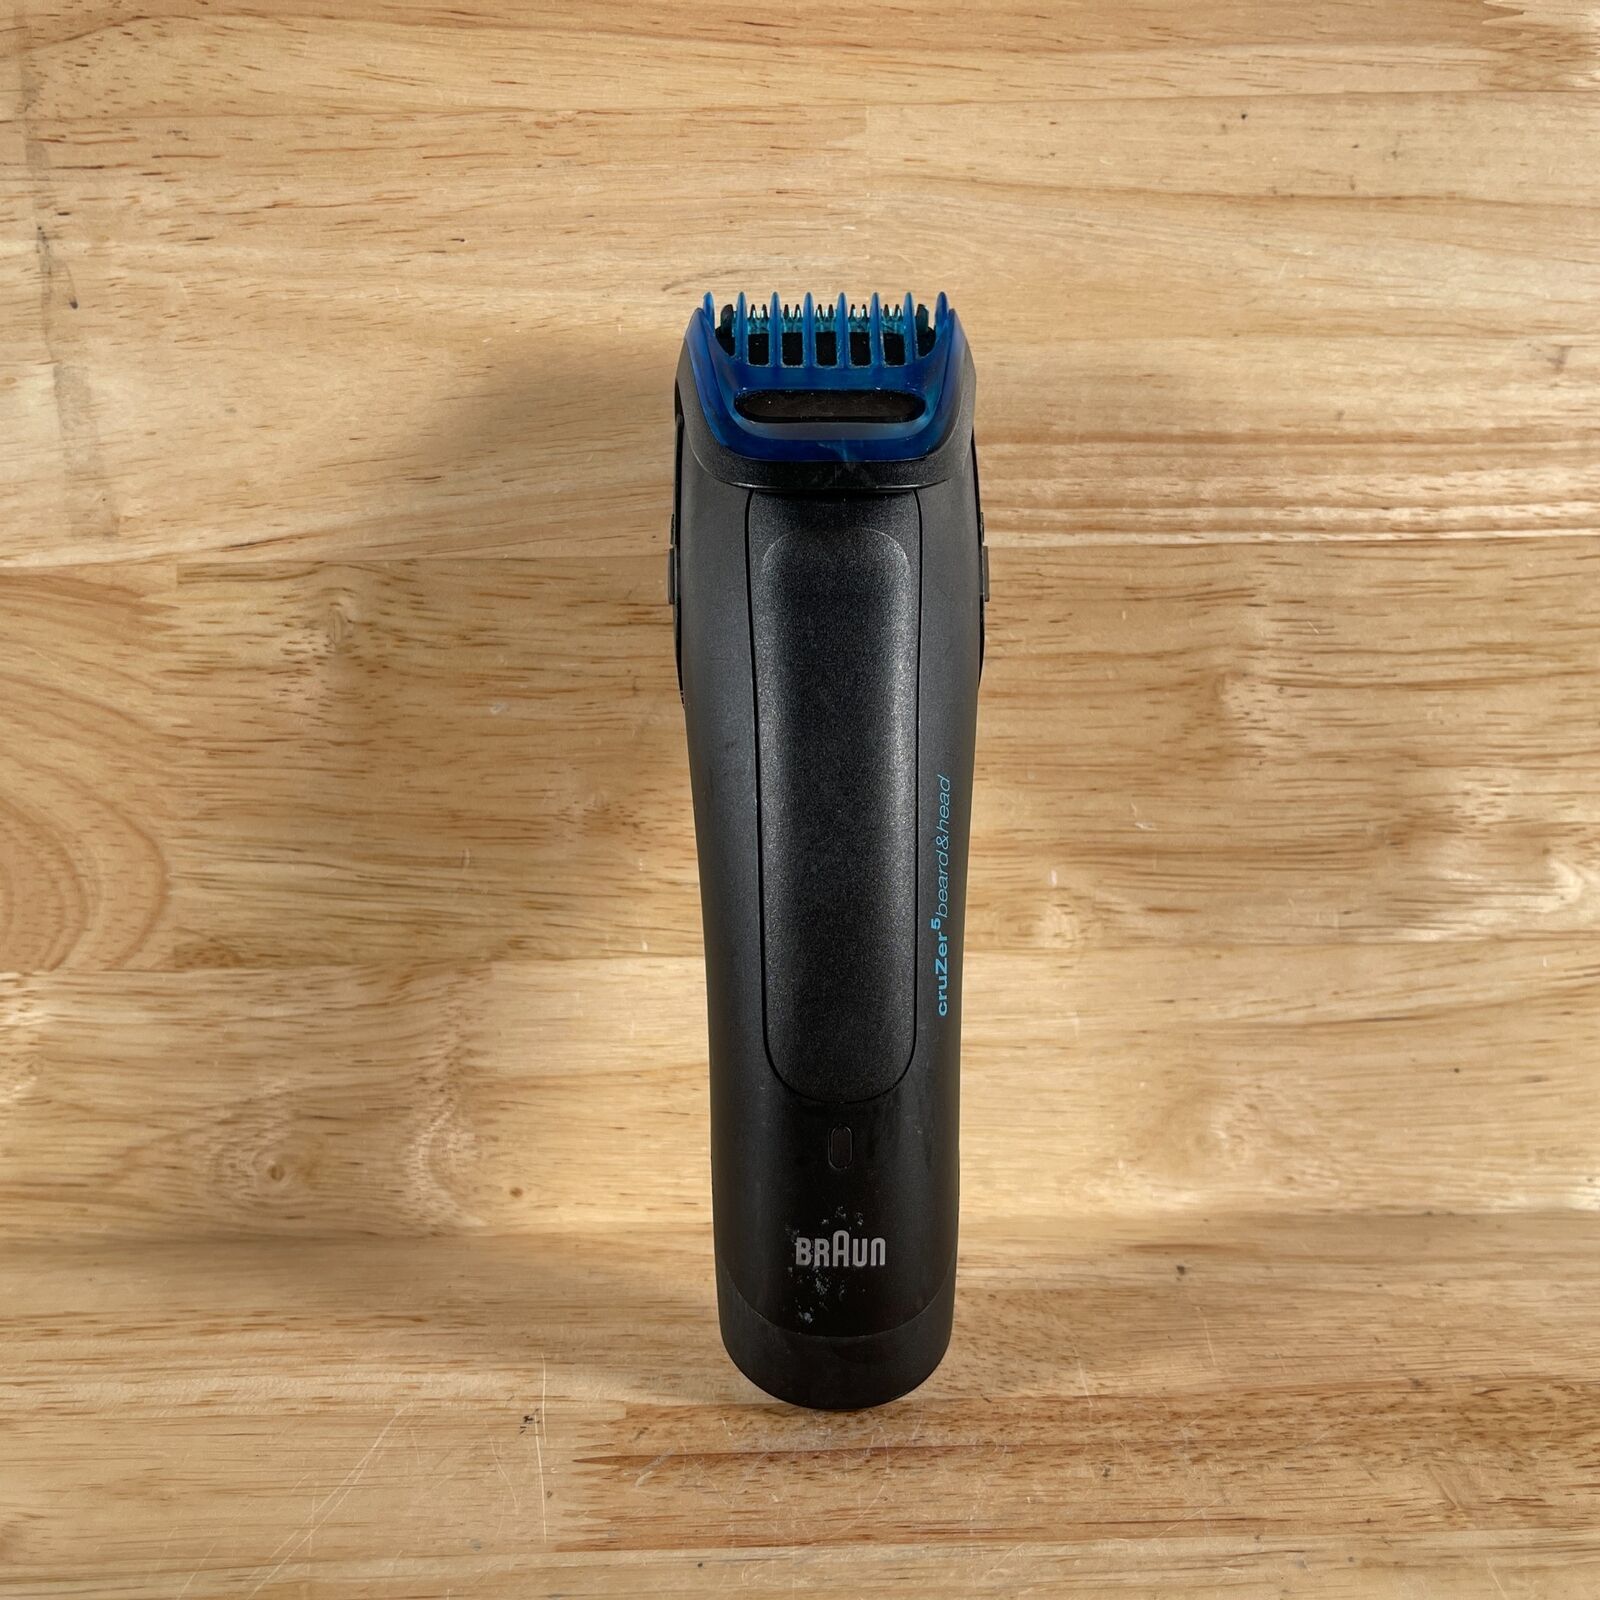 Guilty Accuracy celebration Braun Cruzer 5 Black Mens Rechargeable Stainless Steel Blades Beard/Head  Trimmer | eBay